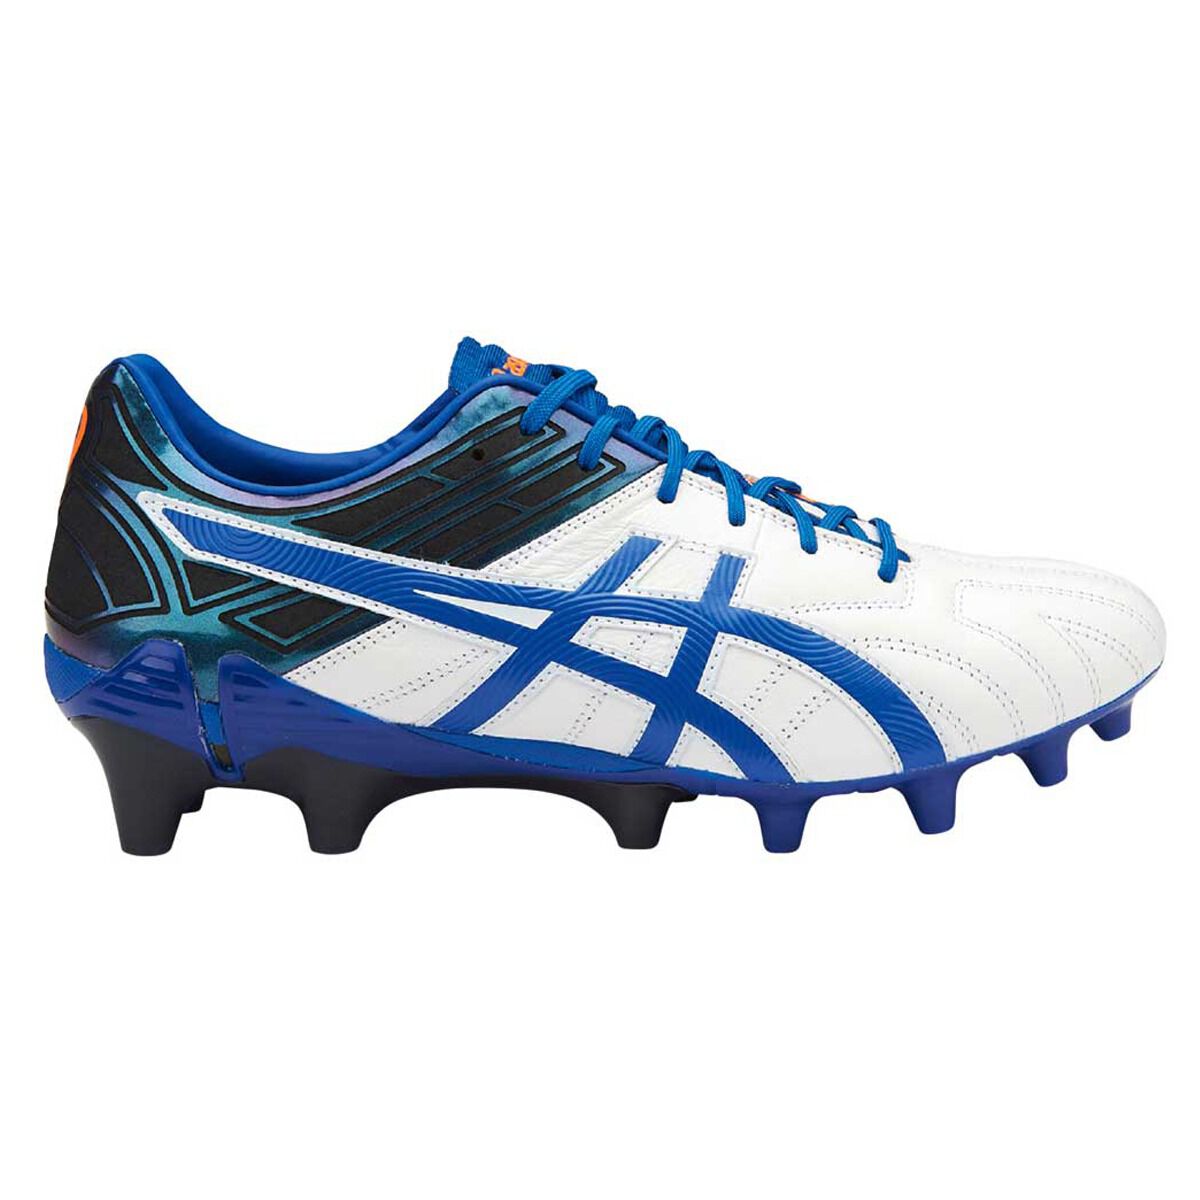 asics gel lethal football boots